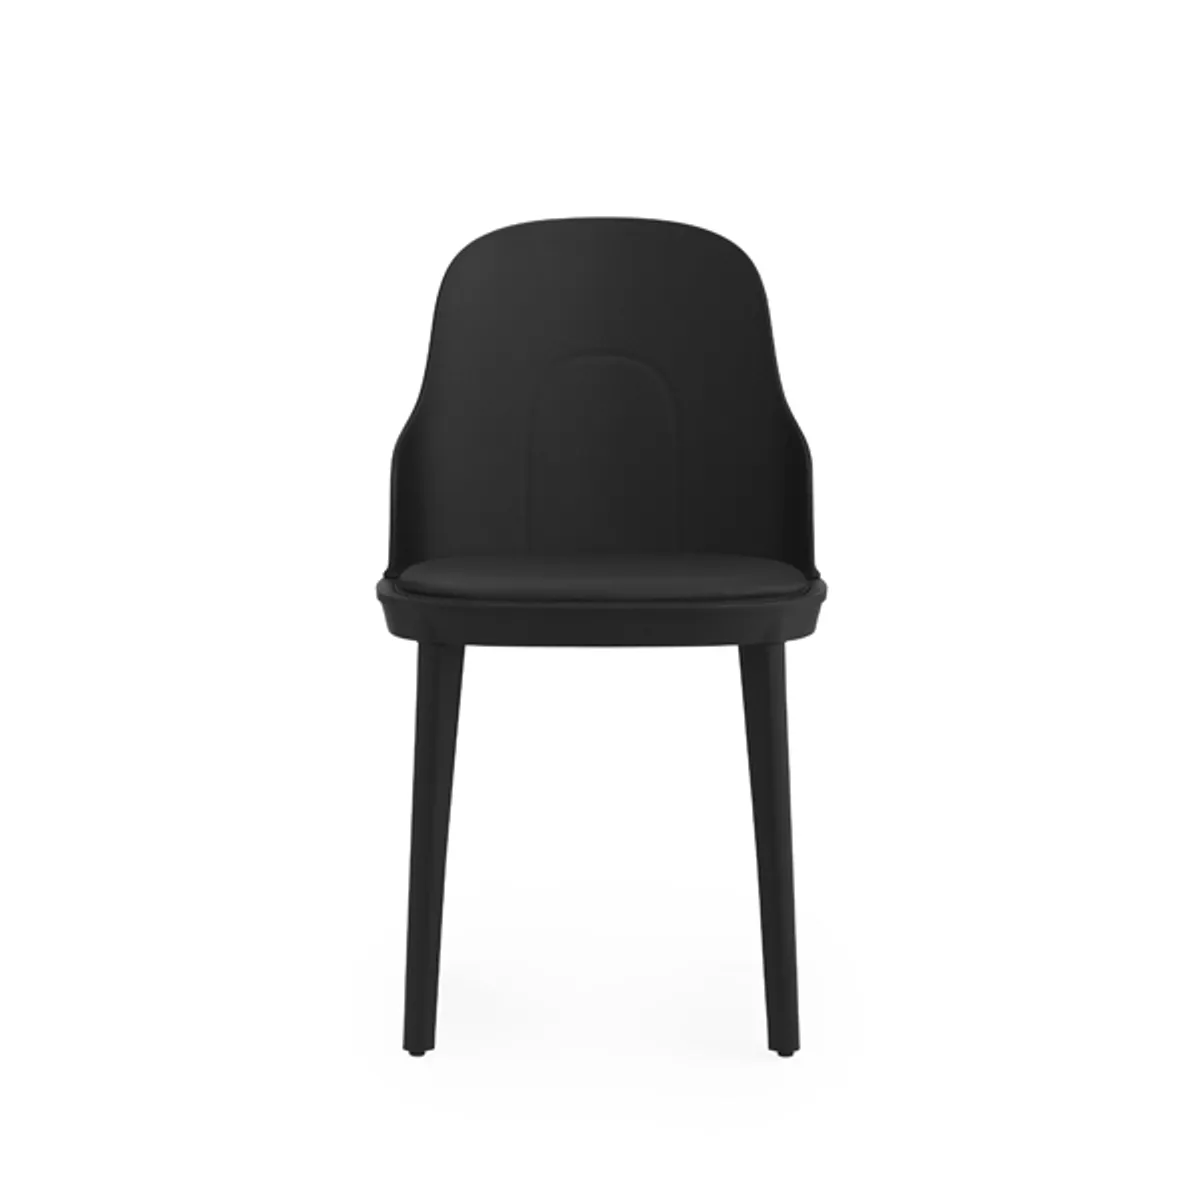 Bon soft poly chair Inside Out Contracts4